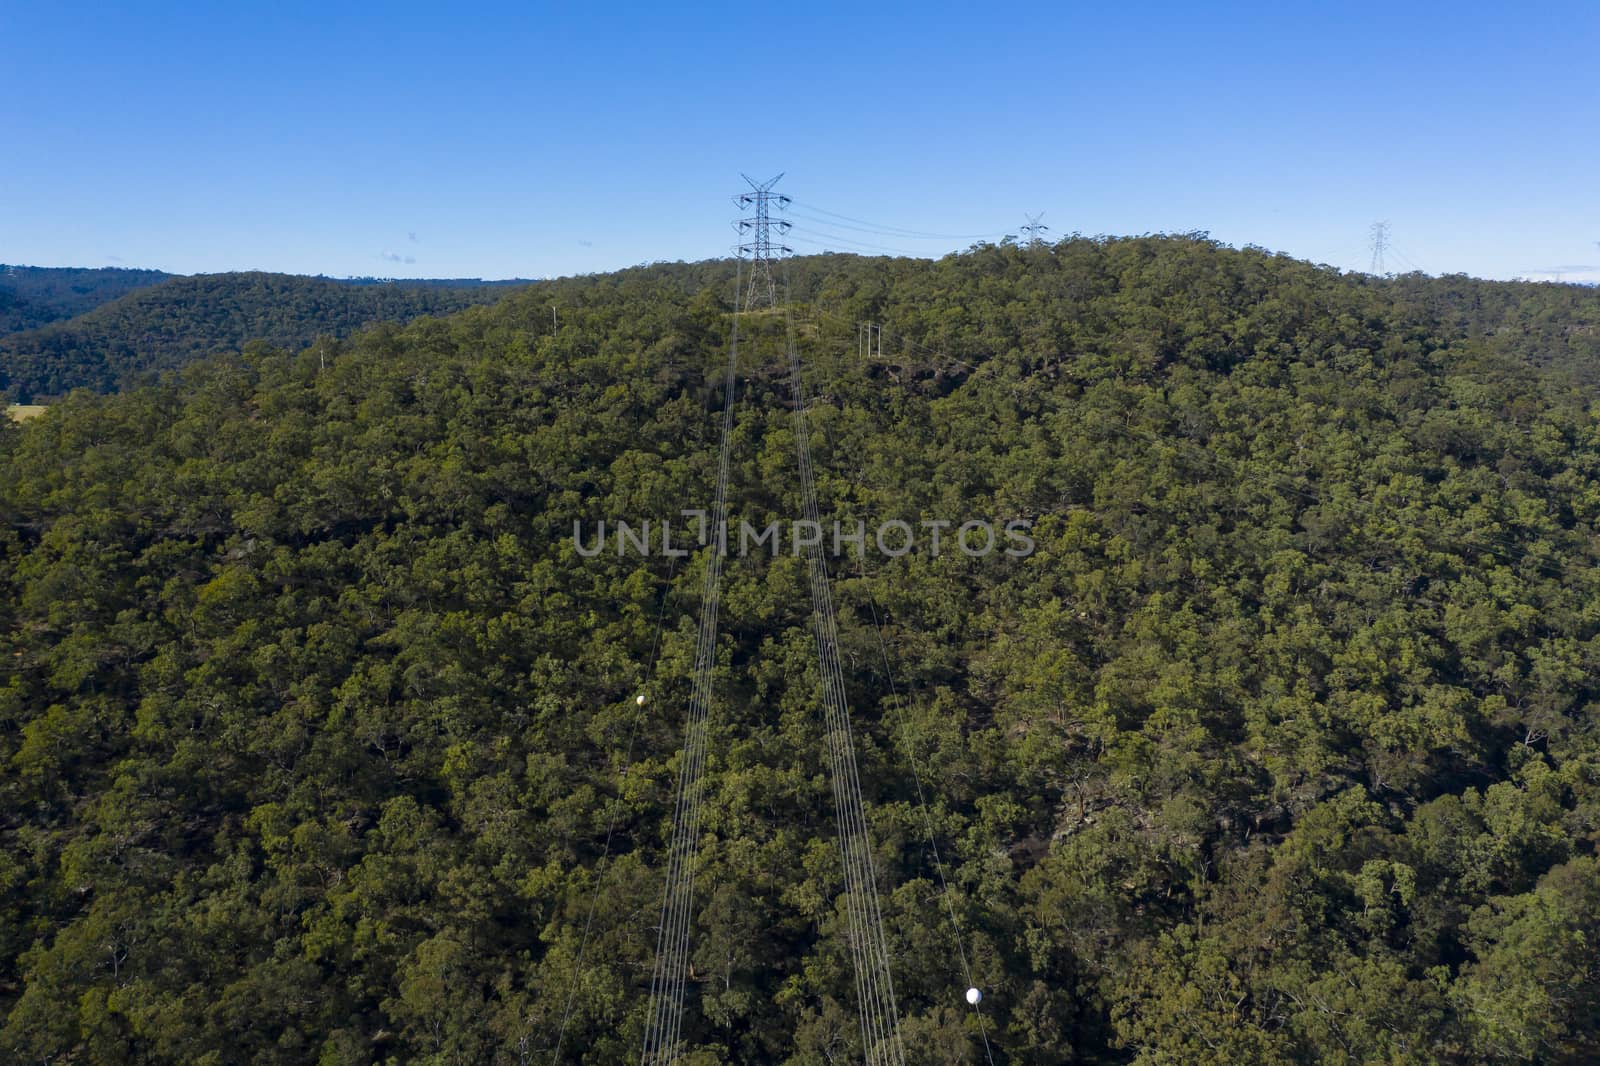 An electricity transmission tower and cables across a river in regional New South Wales in Australia